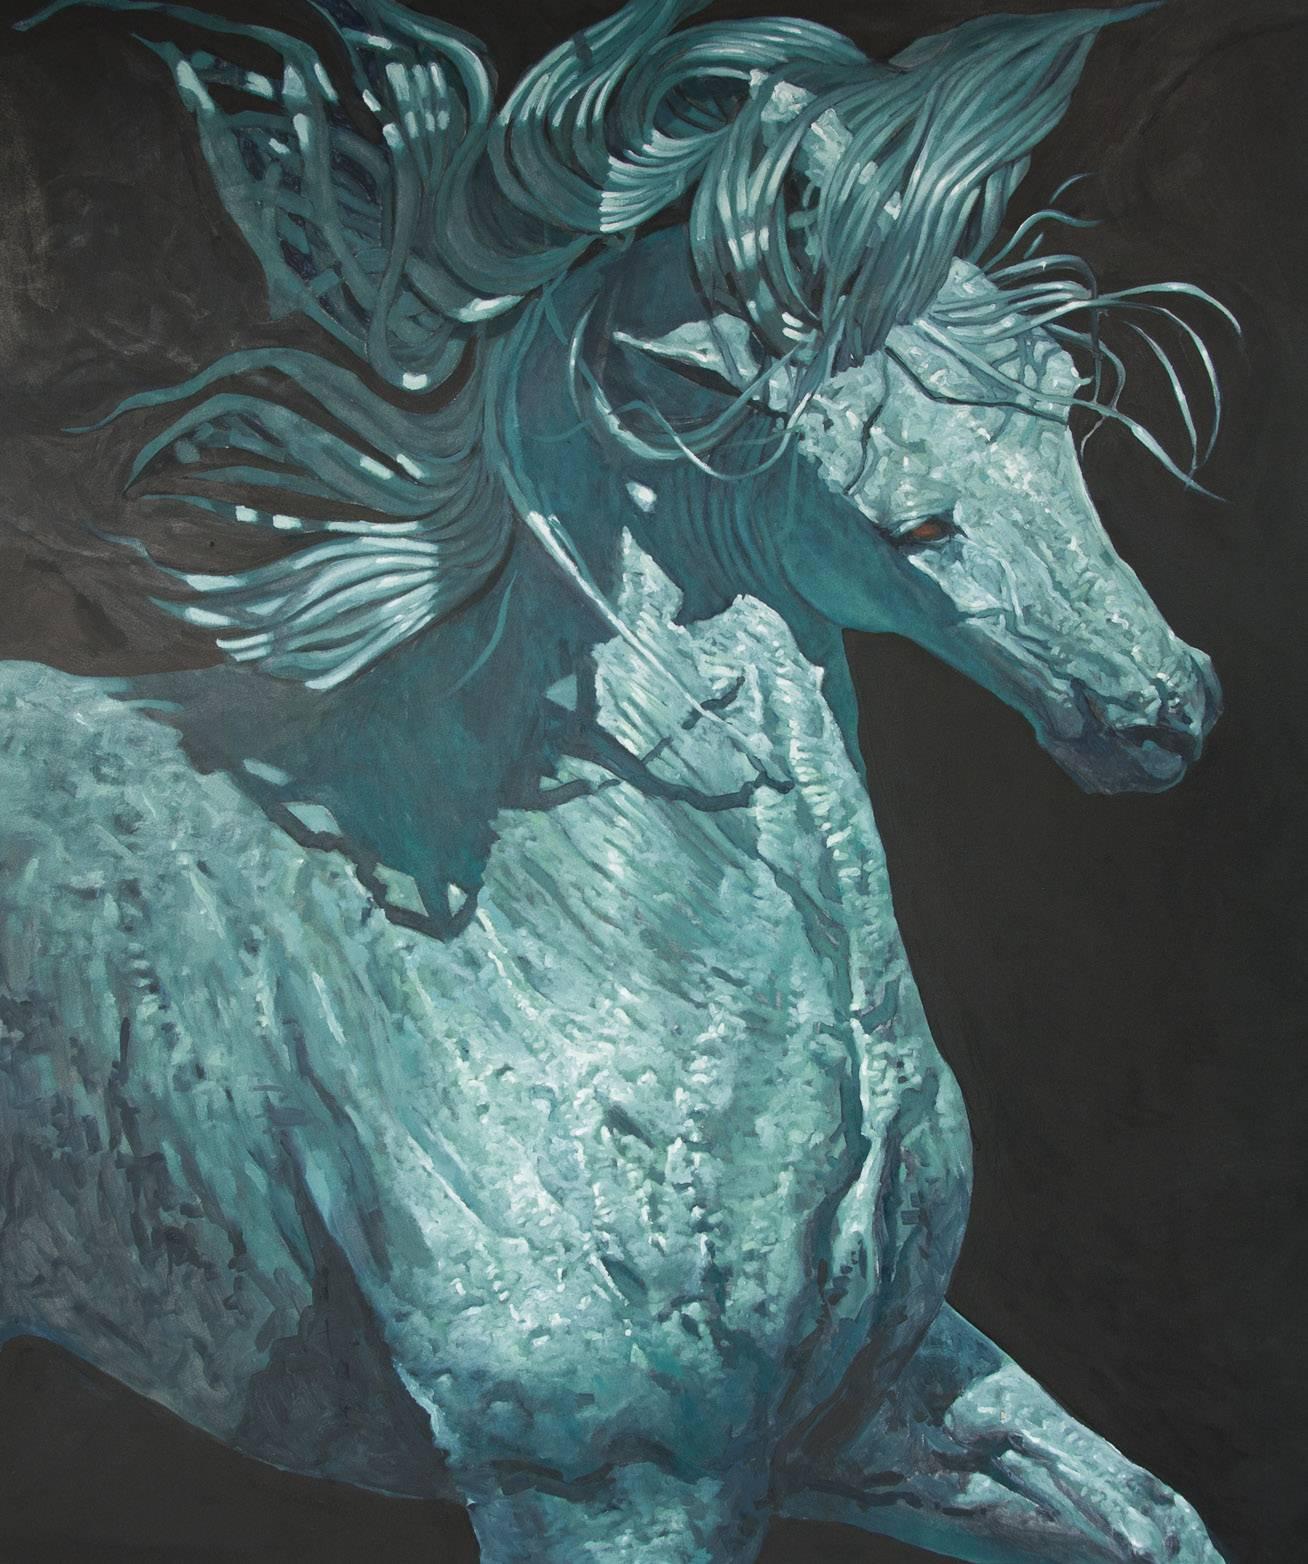 Huw Williams is a fine artist whose work is dominated by the horse, more specifically stunning, striking stallions showing their power and movement.

From his Perthshire studio Huw produces works on a large-scale, ranging from 5ft to 12ft, always